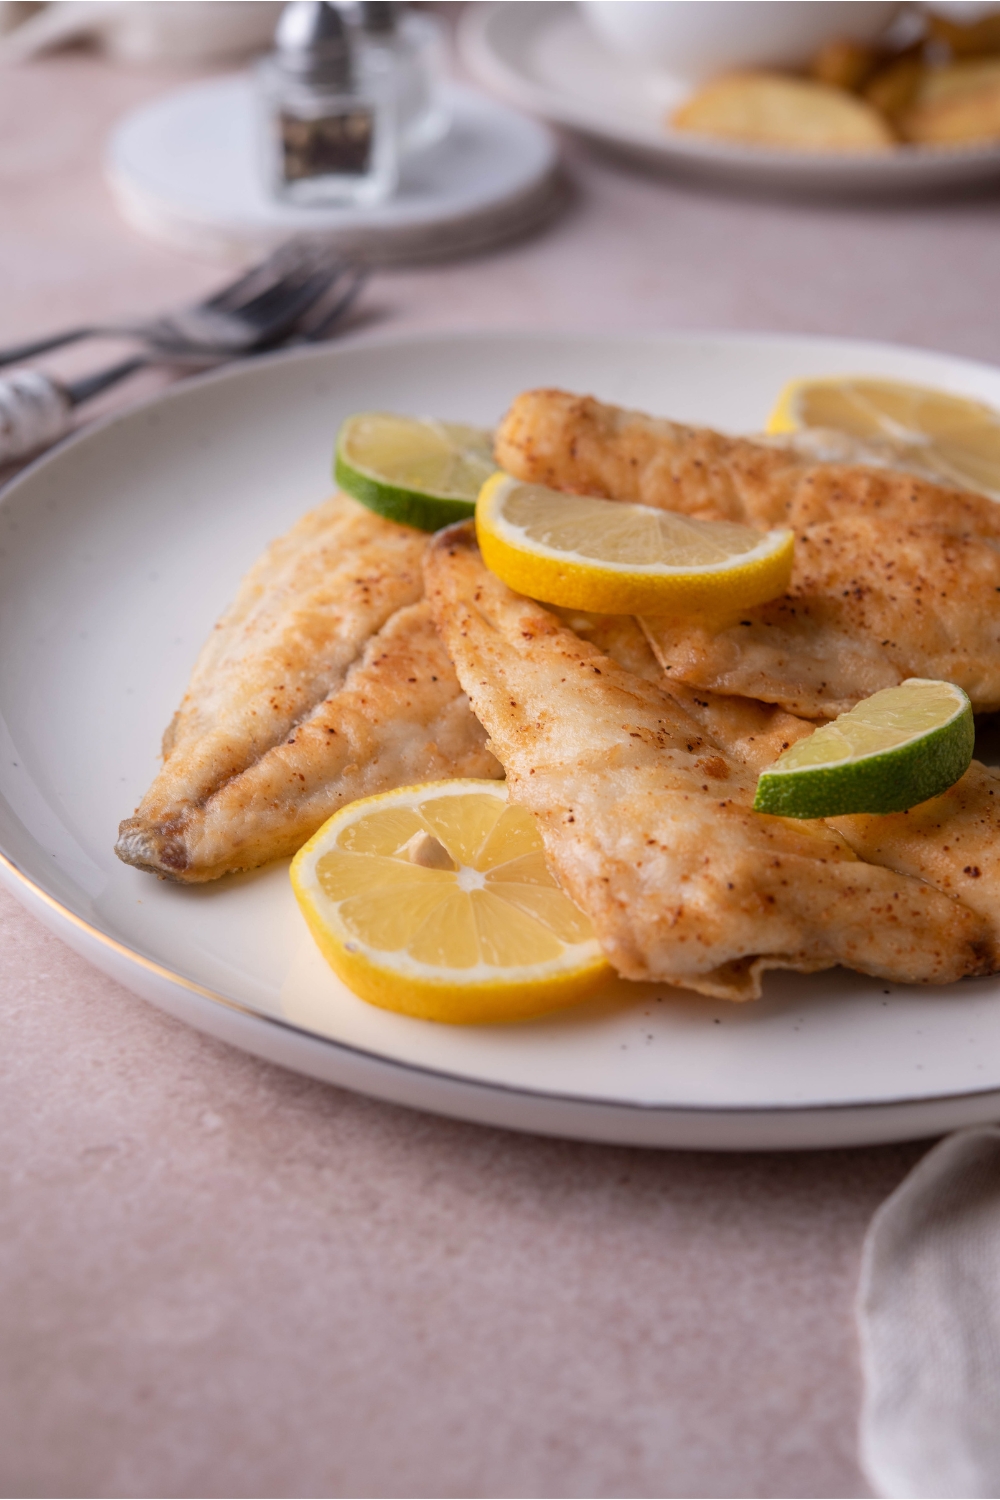 Two pan-fried tilapia fillets plated on top of each other, both garnished with fresh lemon and lime slices.